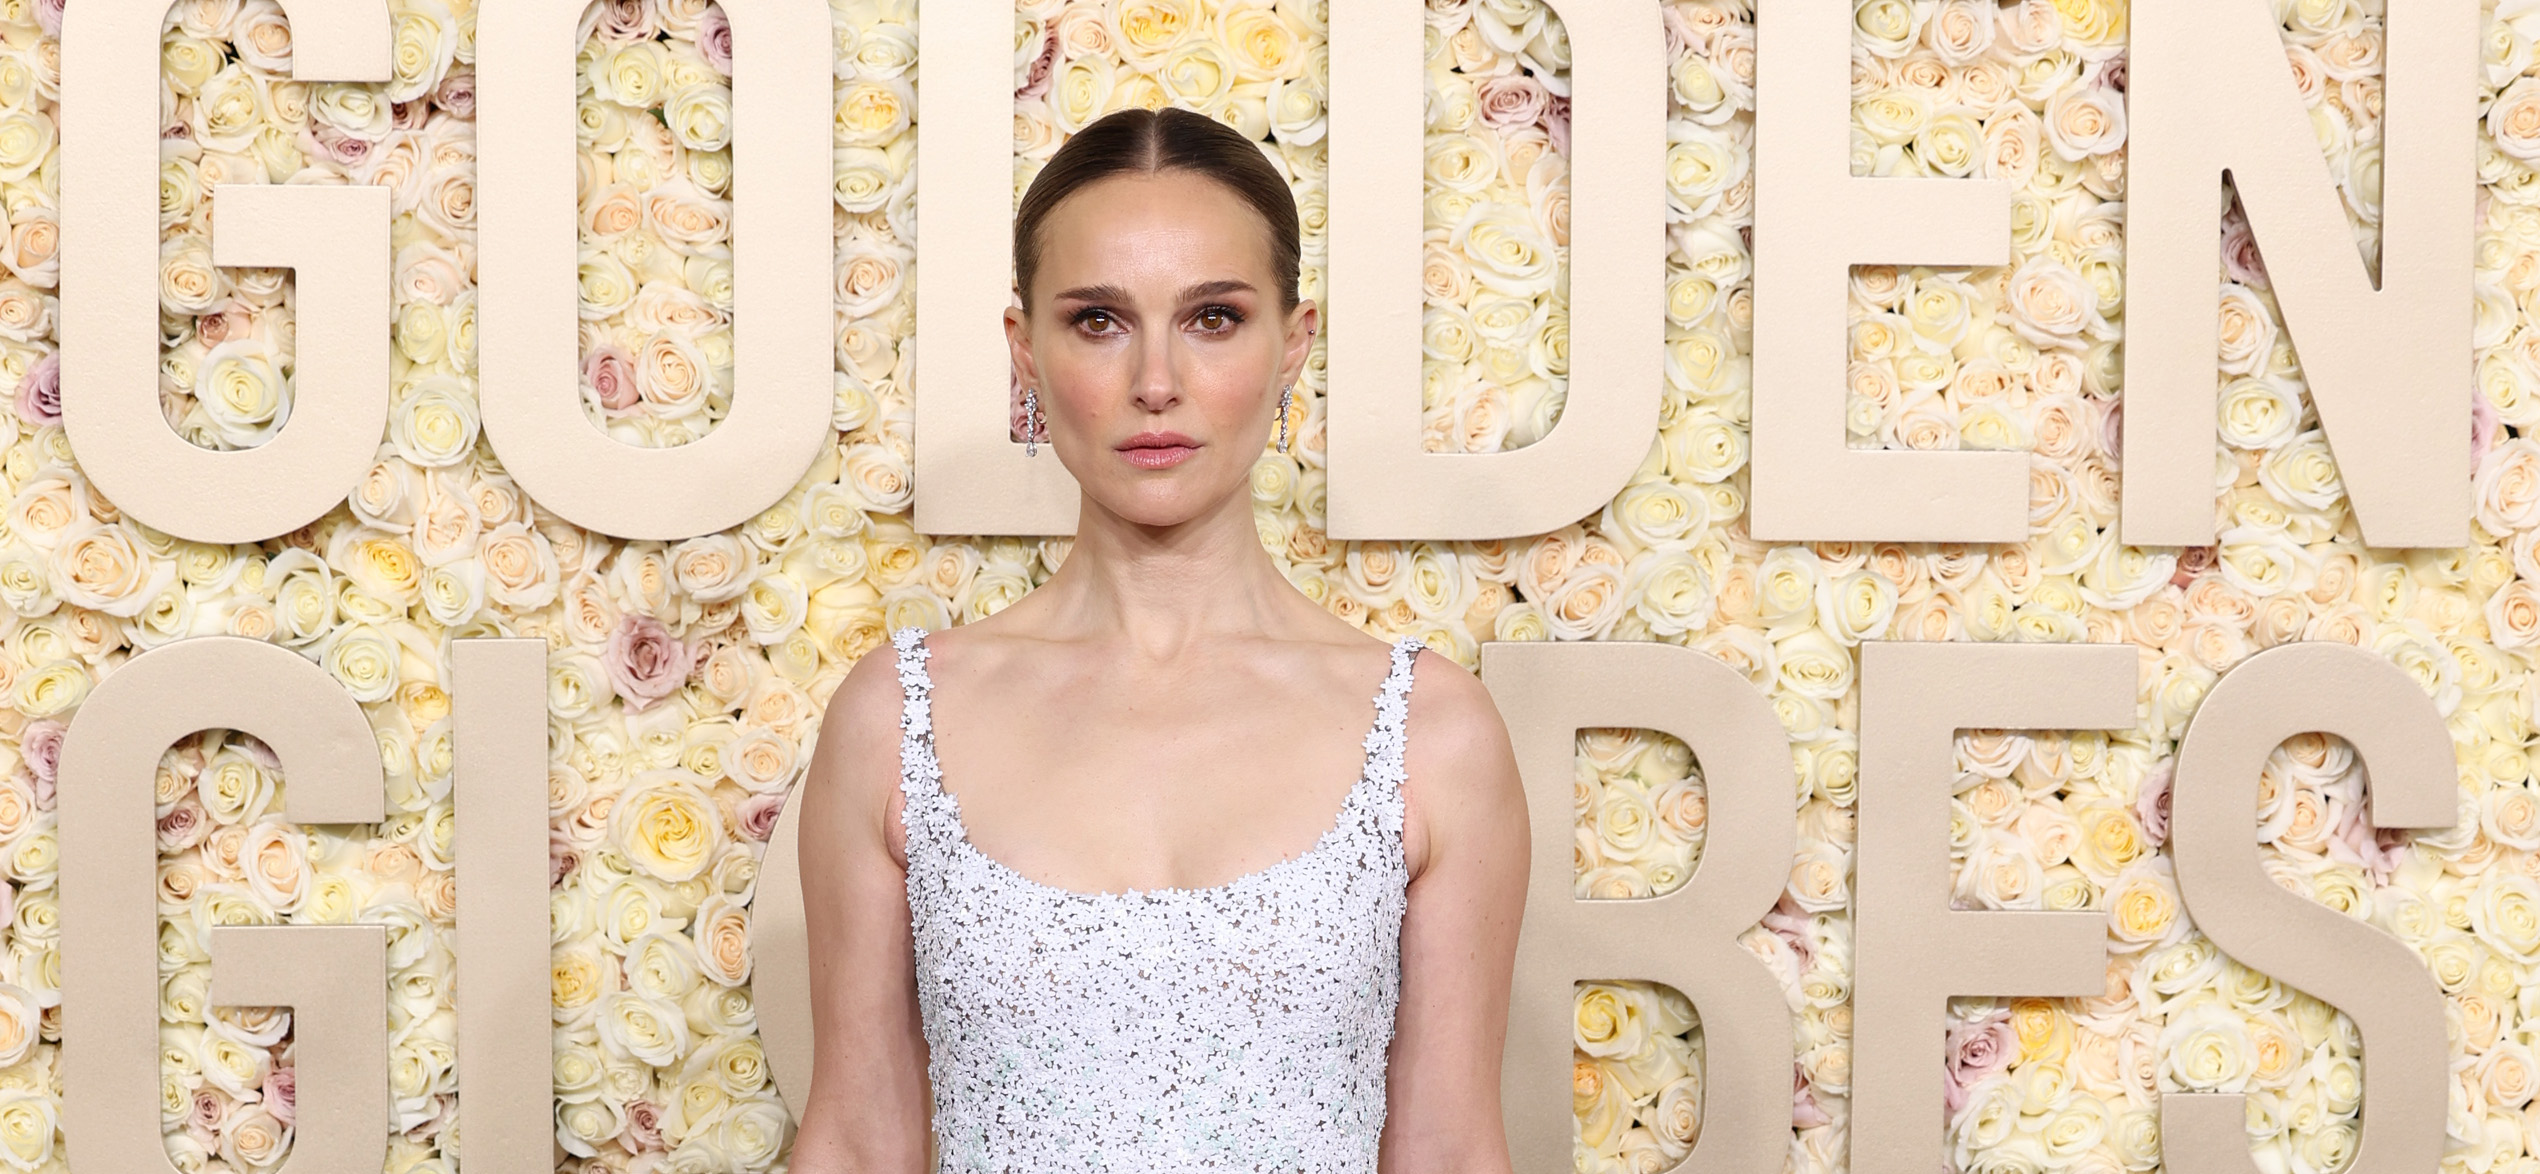 Natalie Portman stands at the 81st Annual Golden Globe Awards, embodying the essence of spring in a gown adorned with delicate, multicolored floral embellishments. The dress features a fitted bodice that transitions into a full, floor-grazing skirt, creating an ethereal silhouette. Her poised, straight posture and serene expression lend an air of refined sophistication, while the gown itself sparkles subtly, mirroring the floral backdrop of the event.